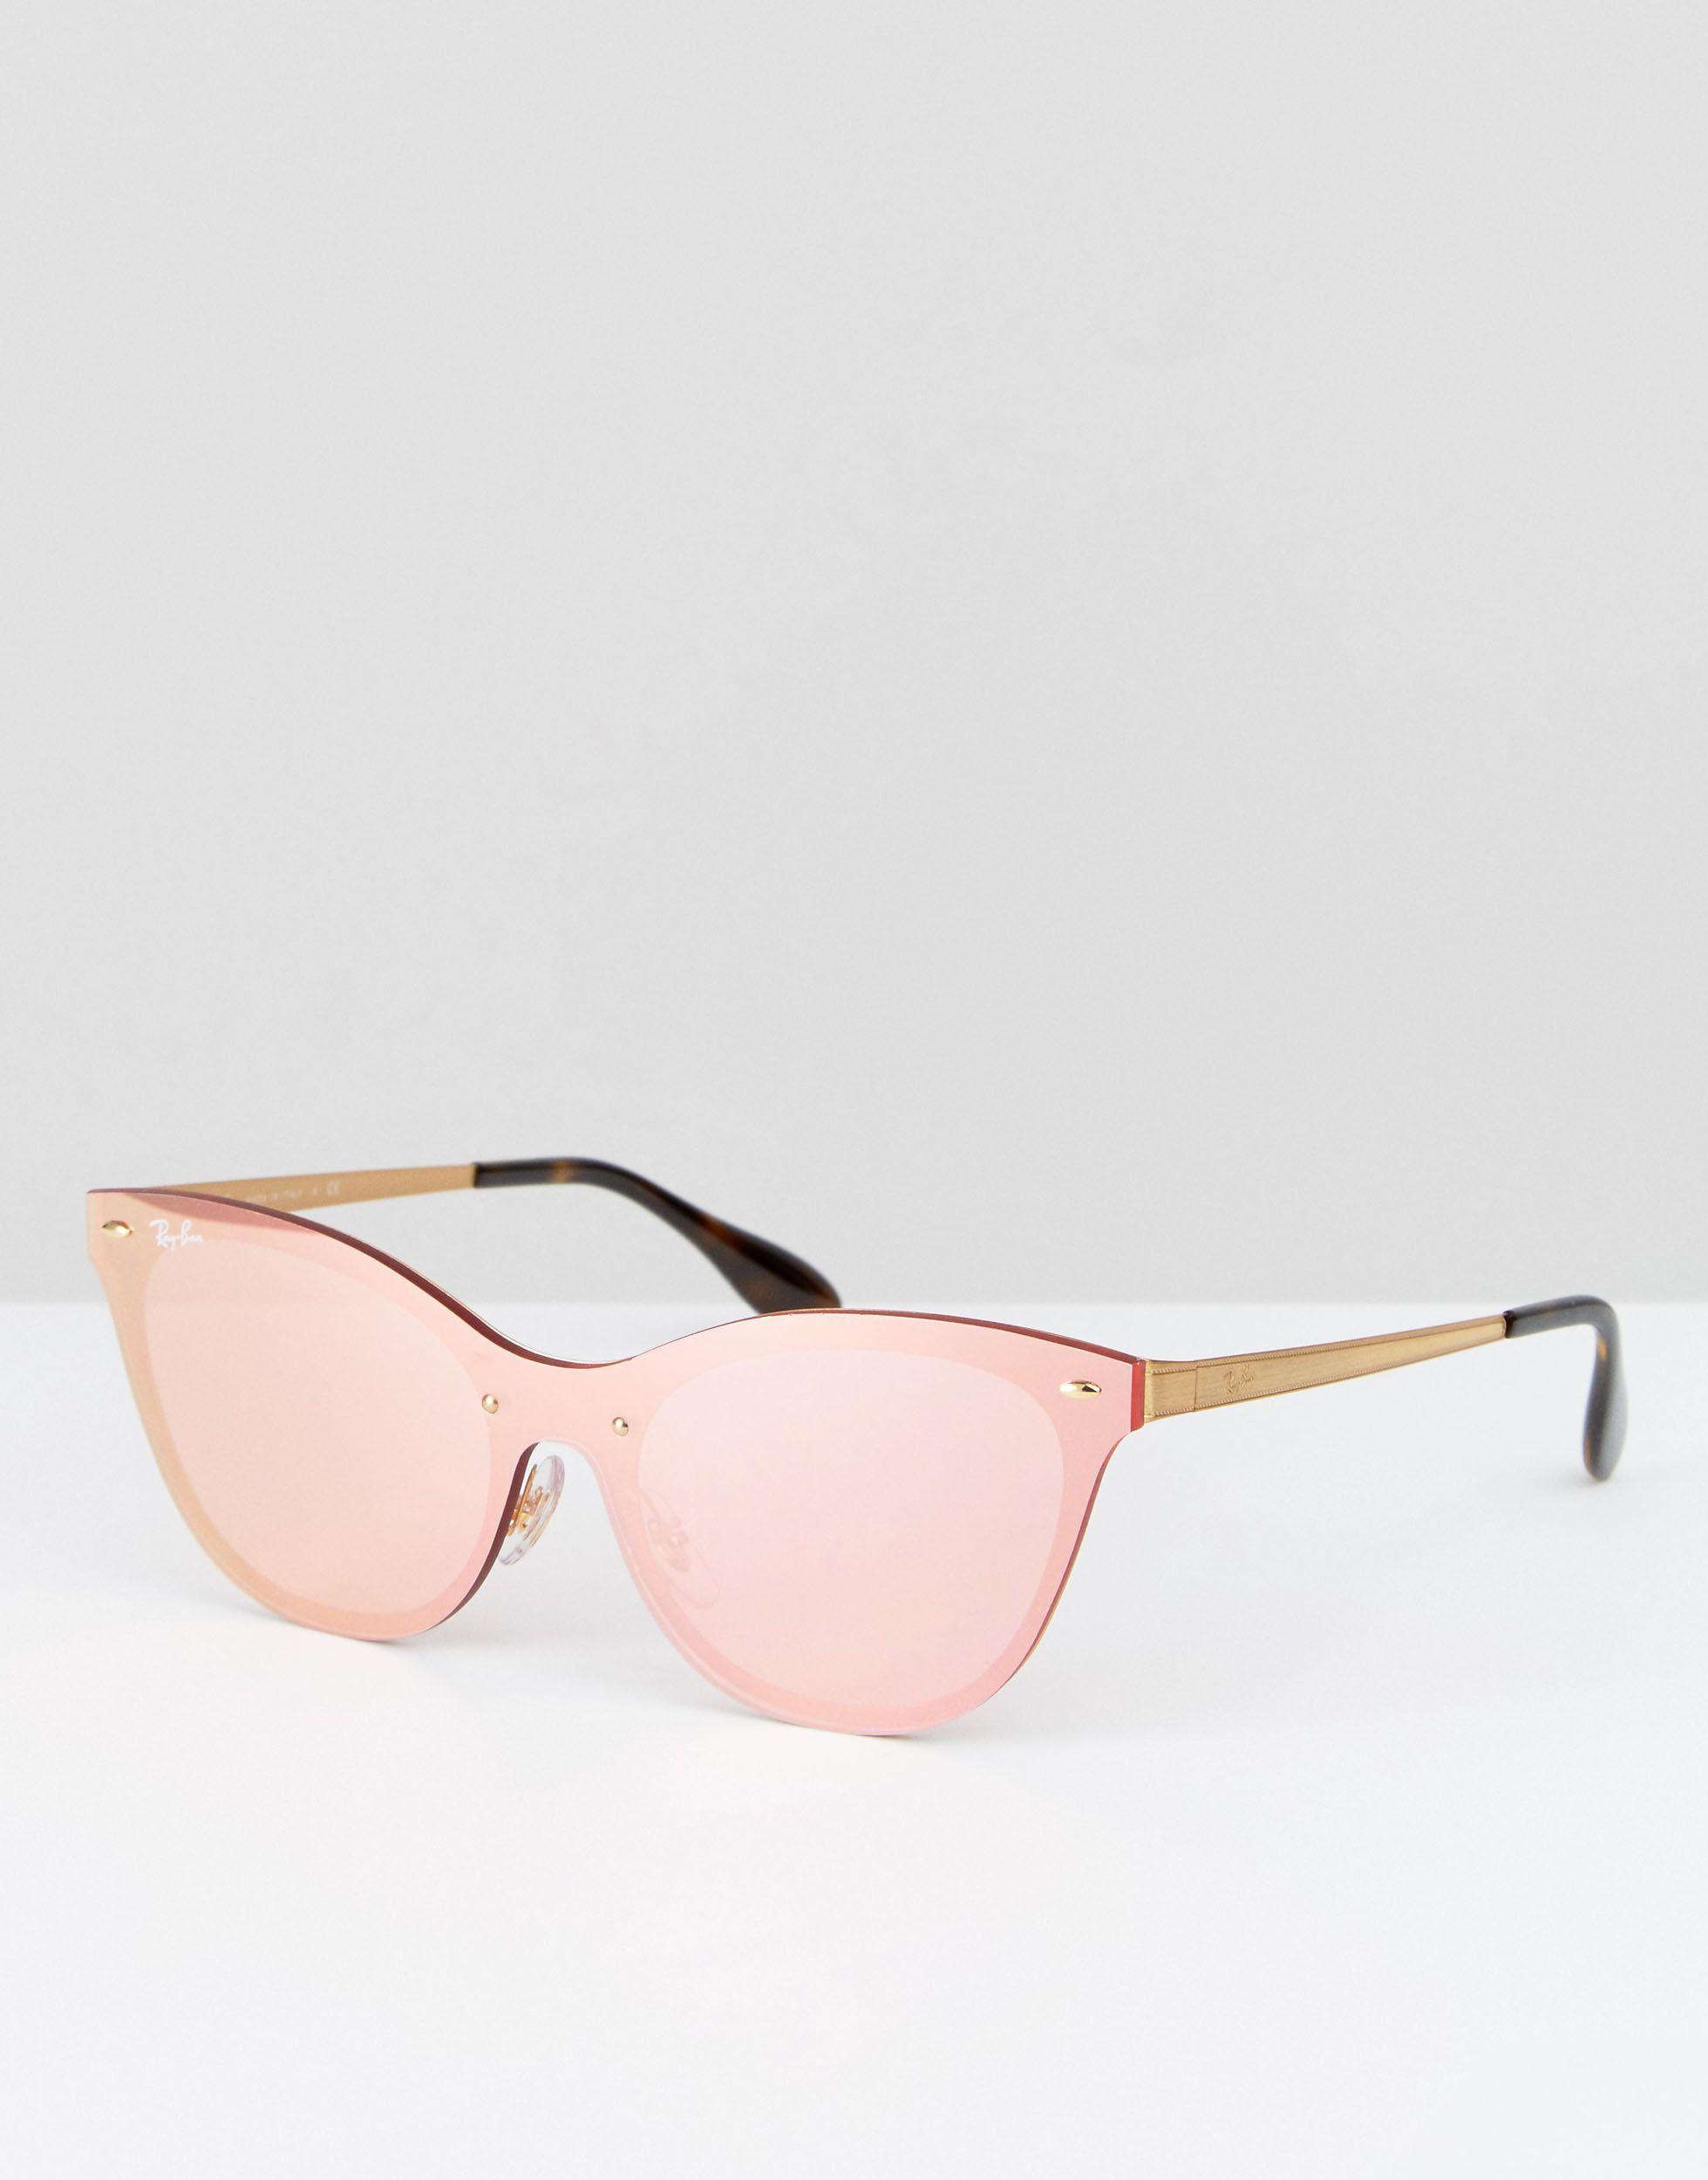 Ray-Ban Ray Ban Flat Lens Cateye Sunglasses in Pink | Lyst